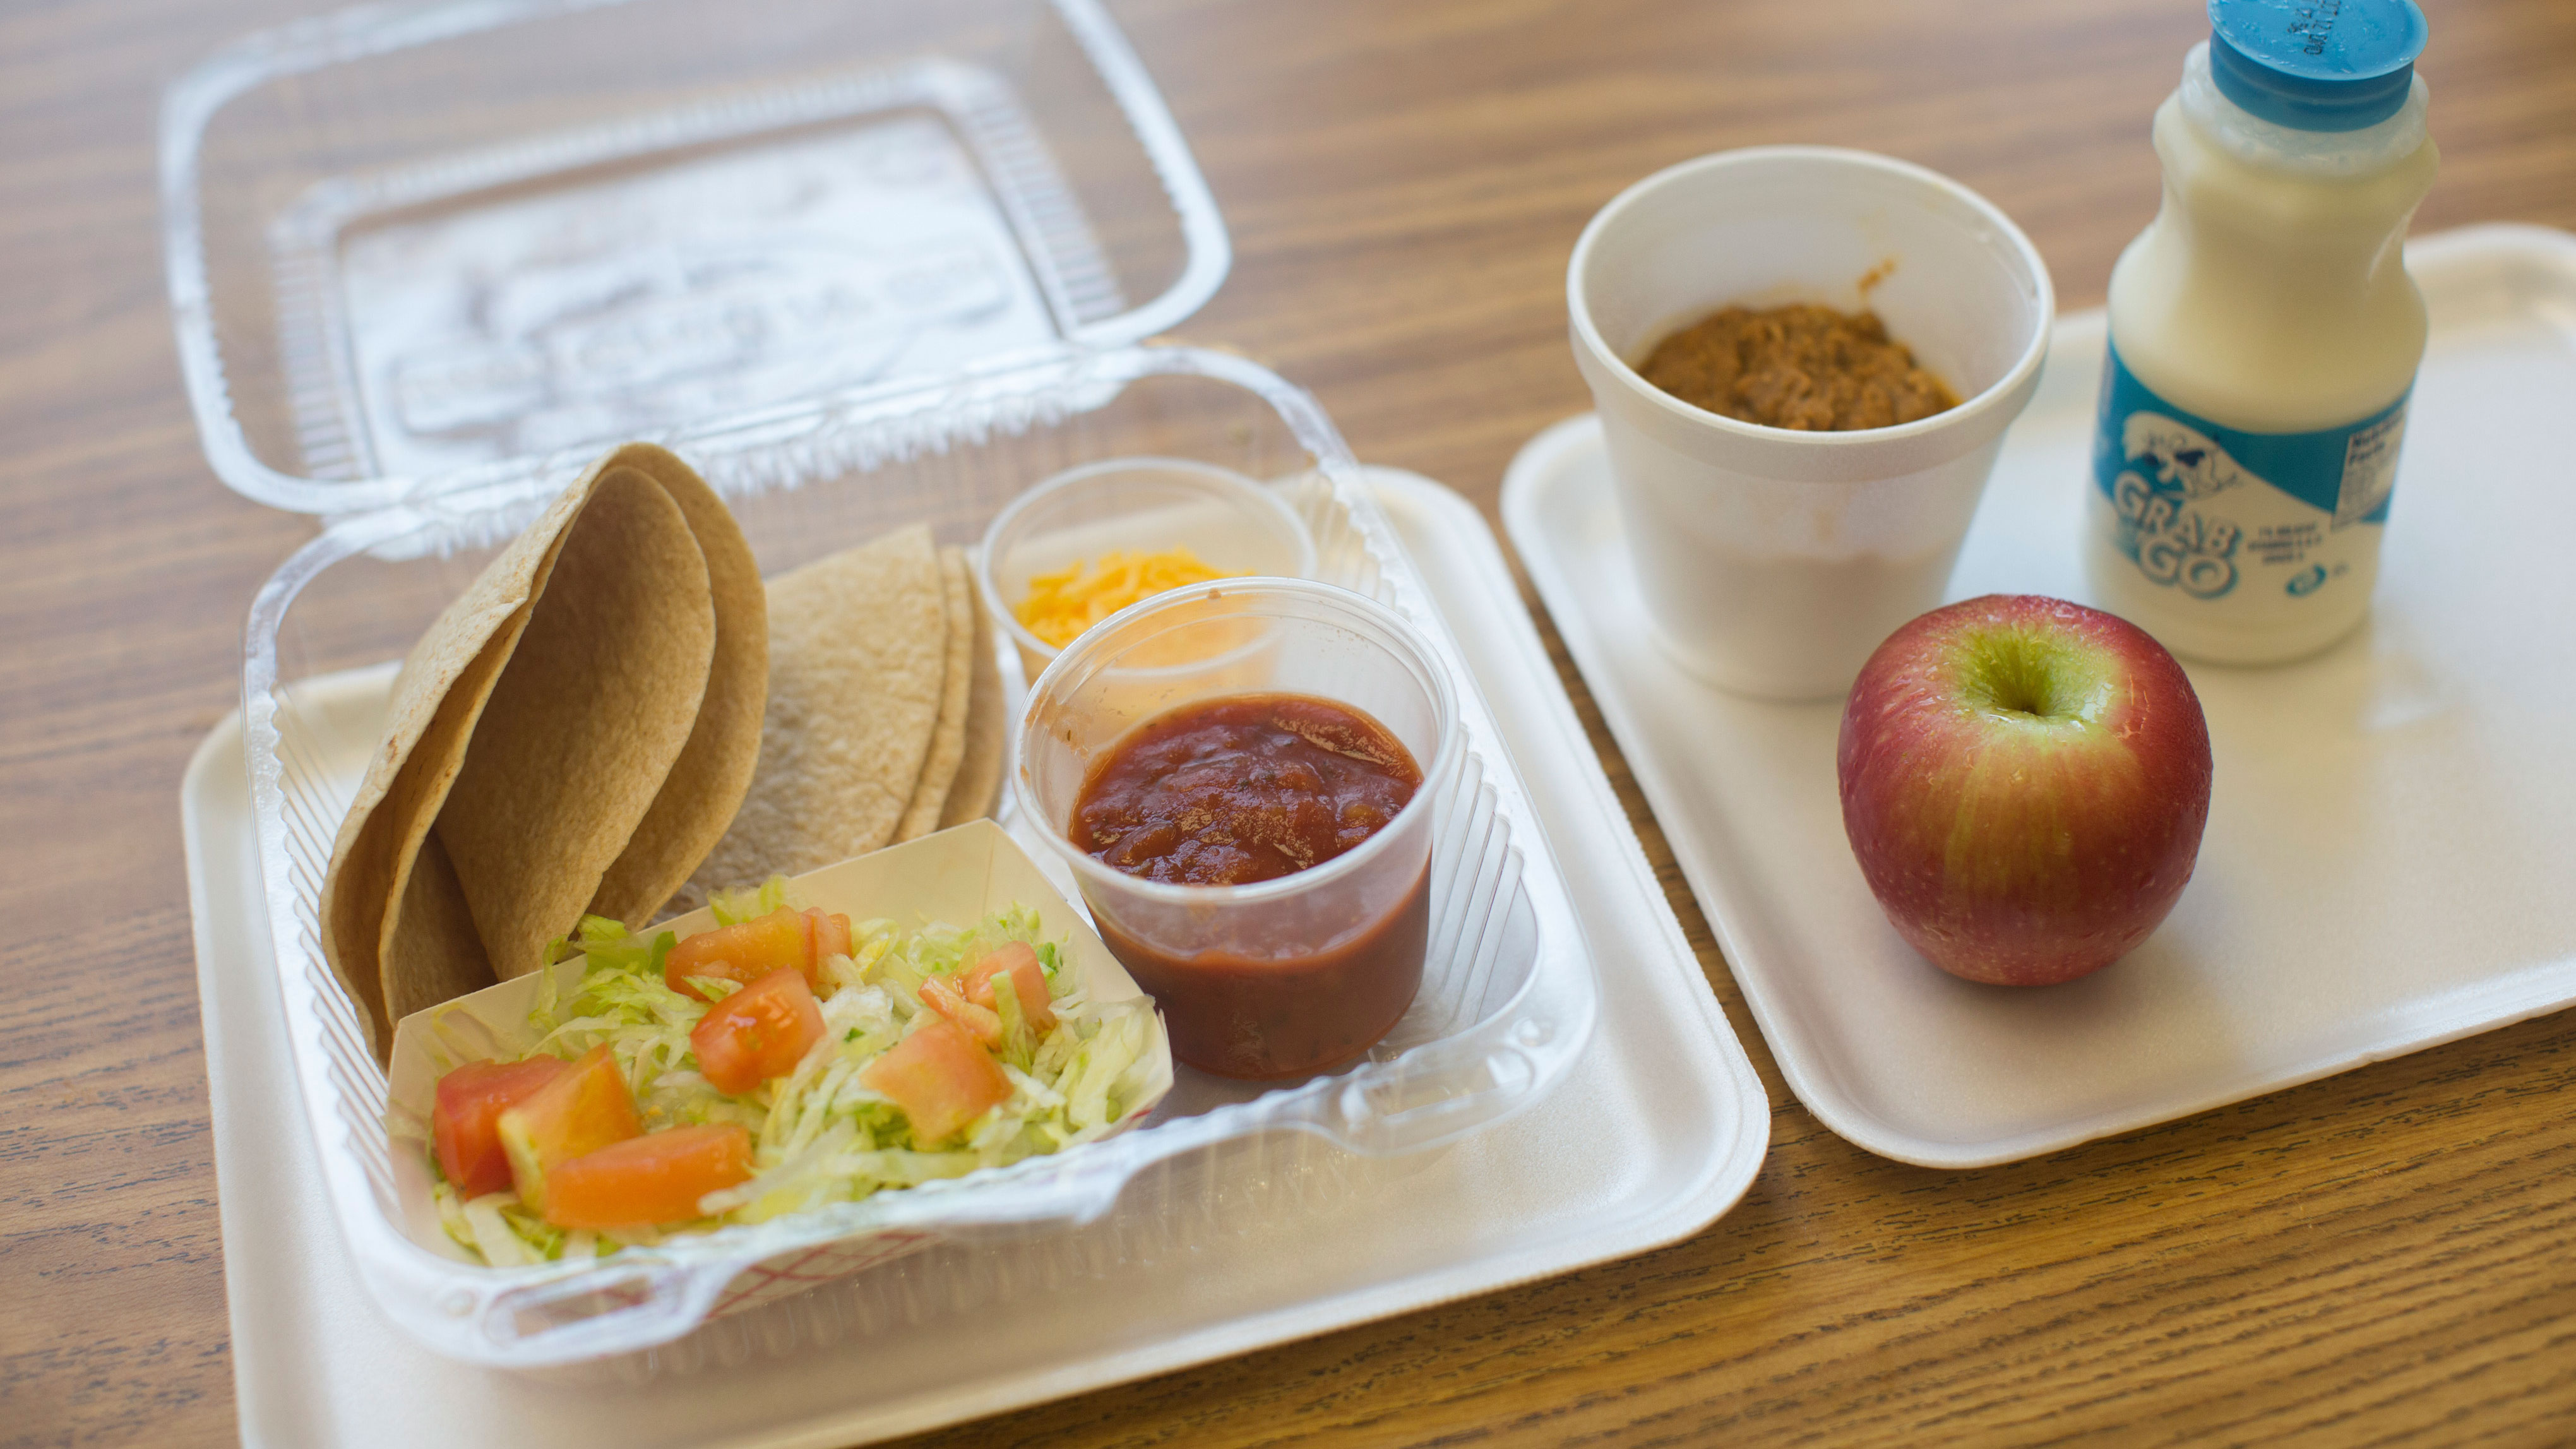 Cafeteria staff prepare school lunches for students